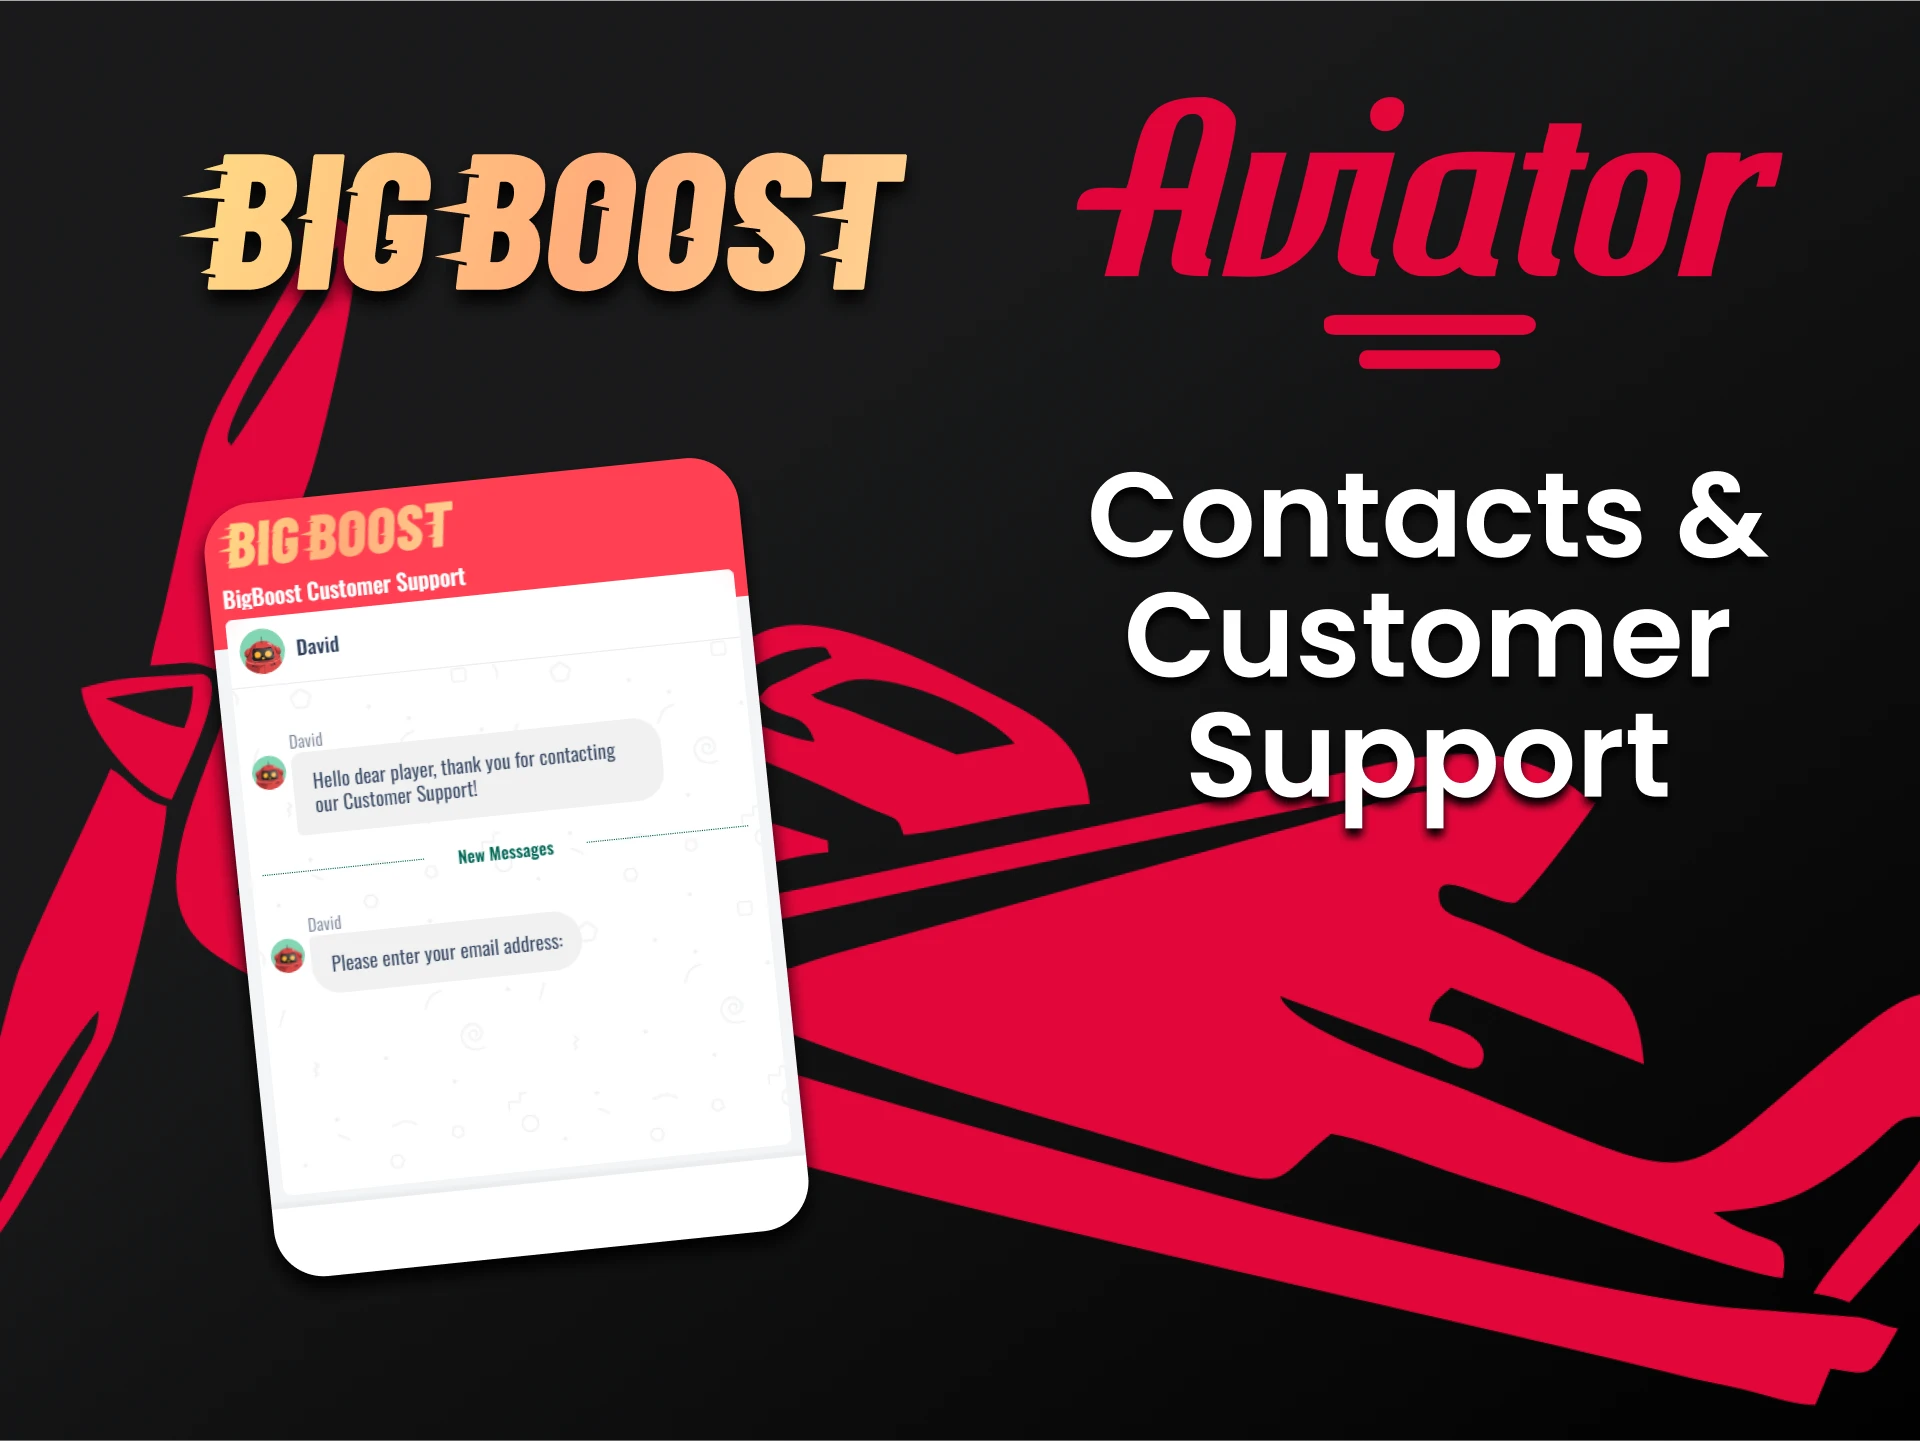 Big Boost technical support is always in touch with Aviator players.